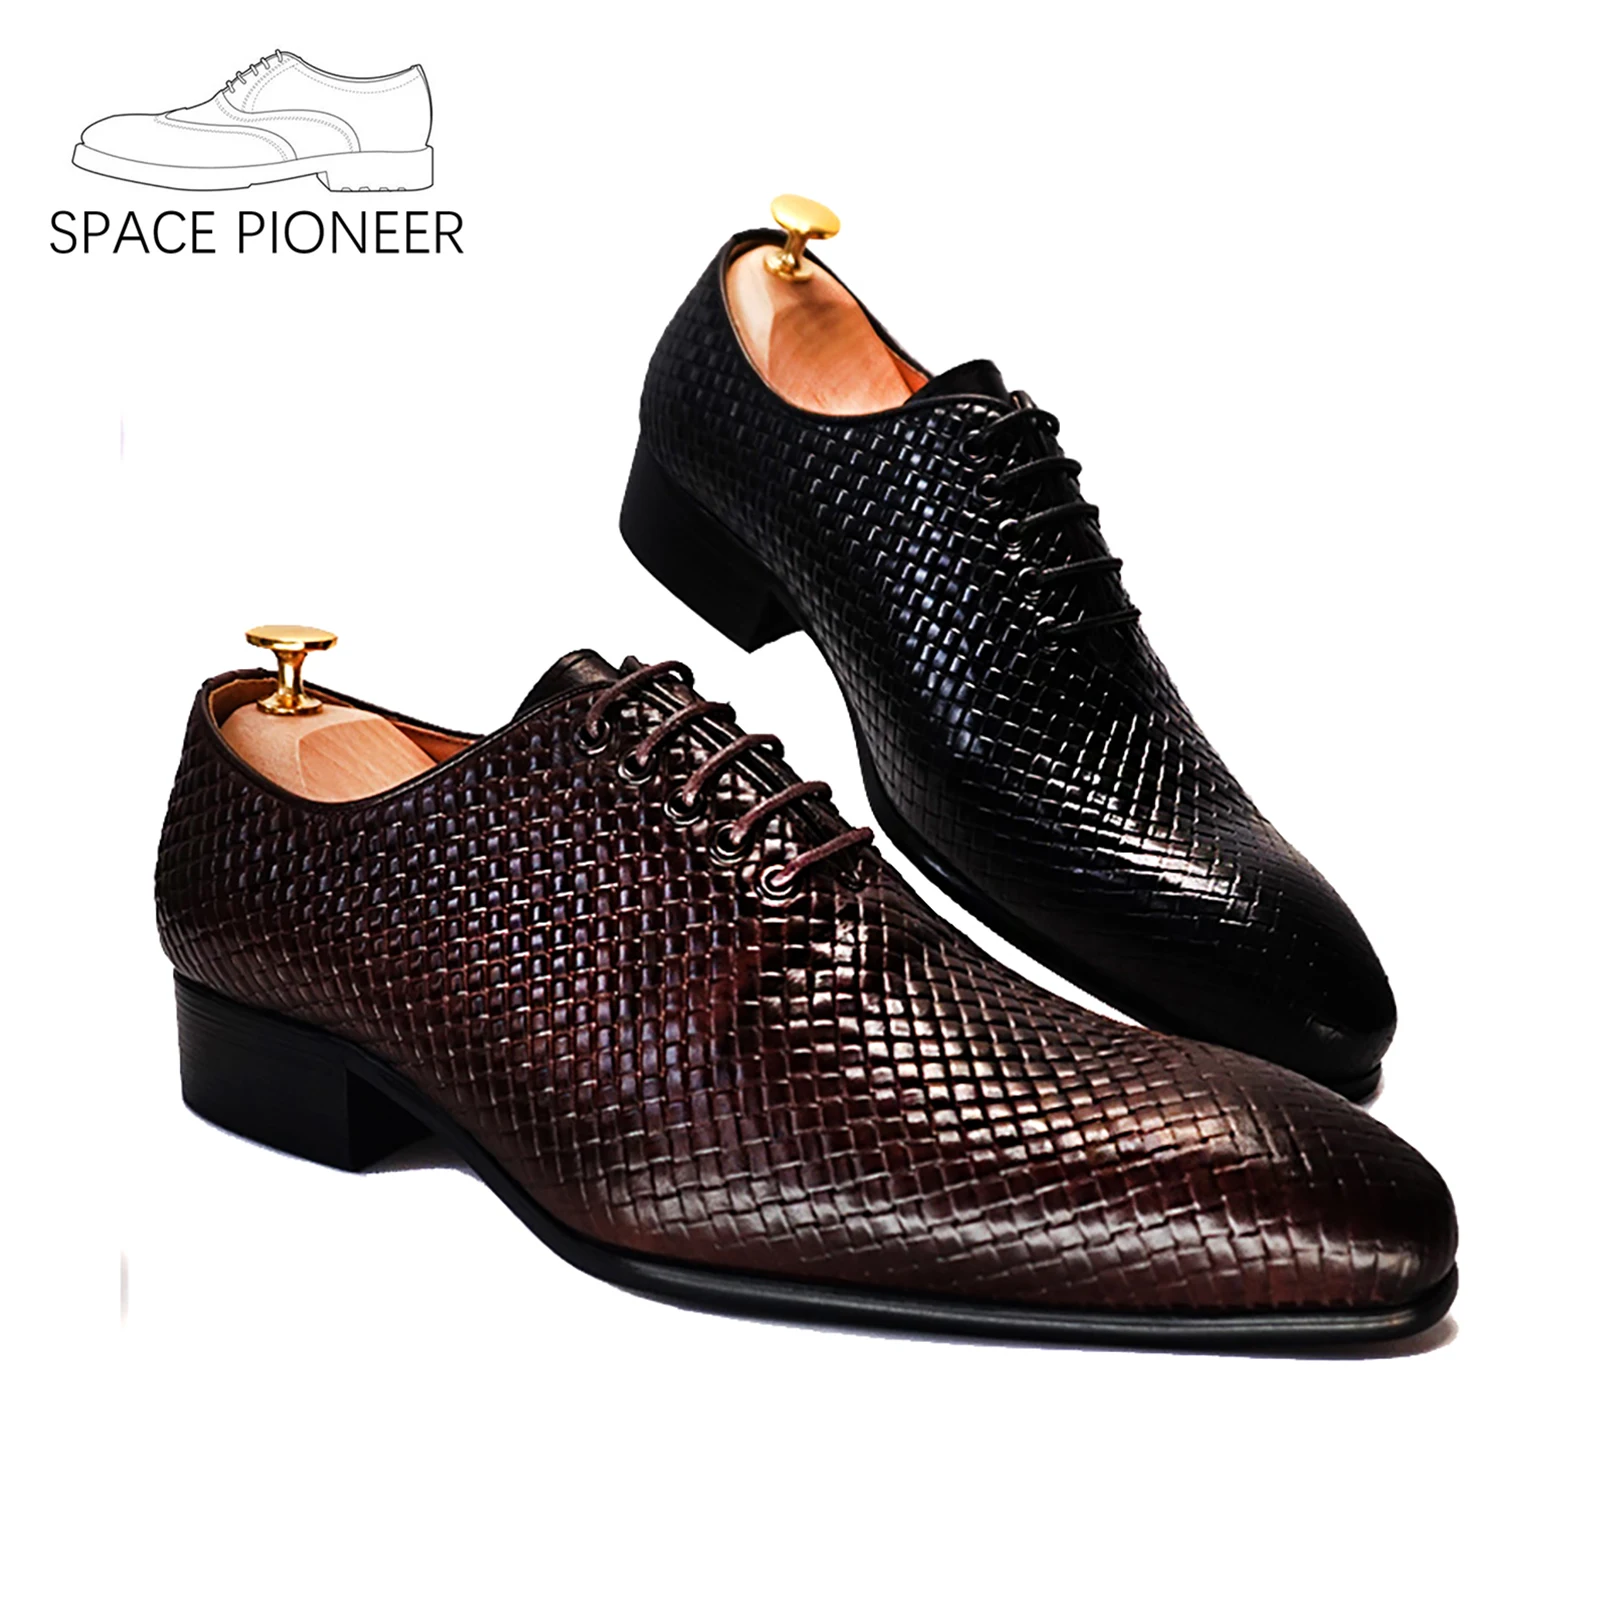 LUXURY LEATHER MEN SHOES CASUAL MEN OFFICE BUSINESS WEDDING SHOE COFFEE BLACK LACE-UP PLAID PRINT POINTED OXFORD SHOES FOR MEN